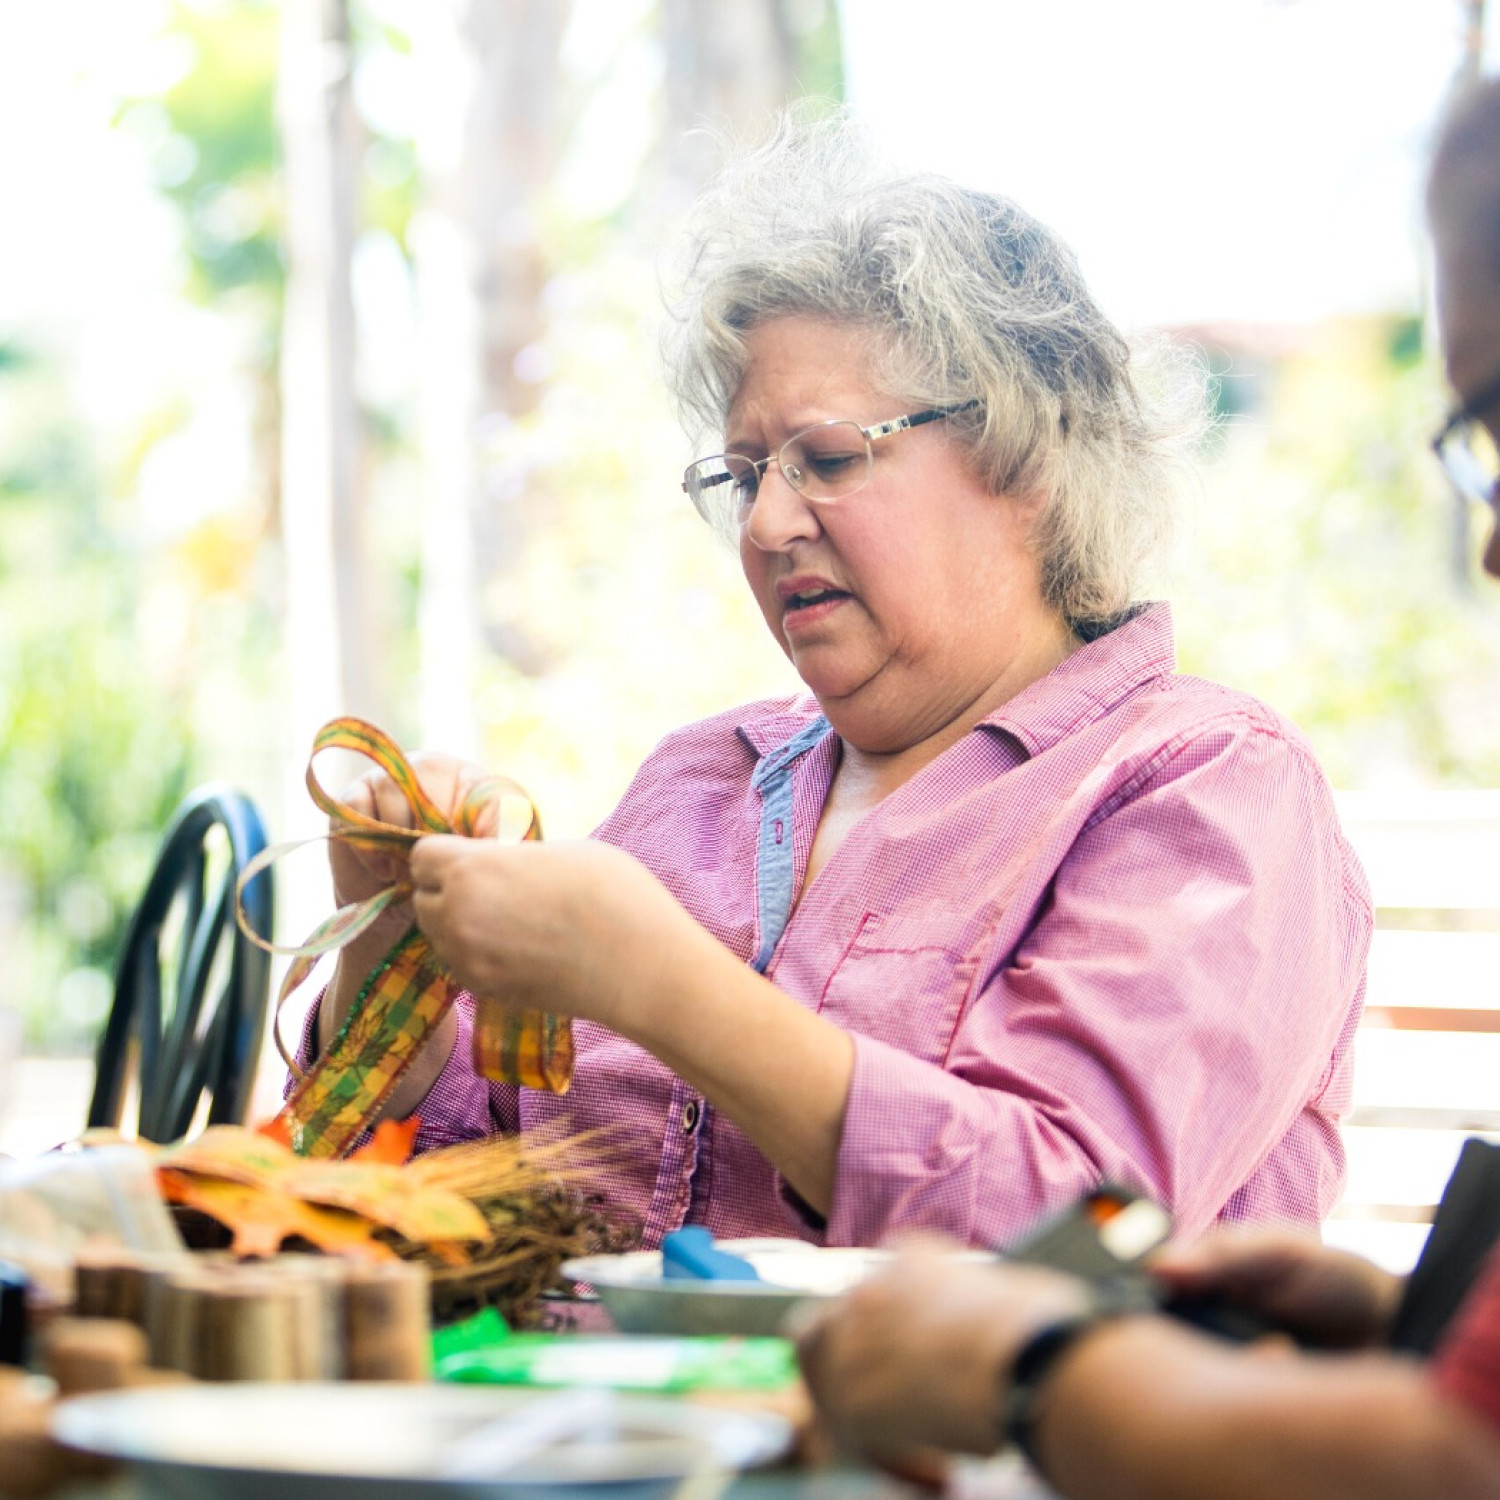 An older woman folds over ribbon while making crafts with a client.